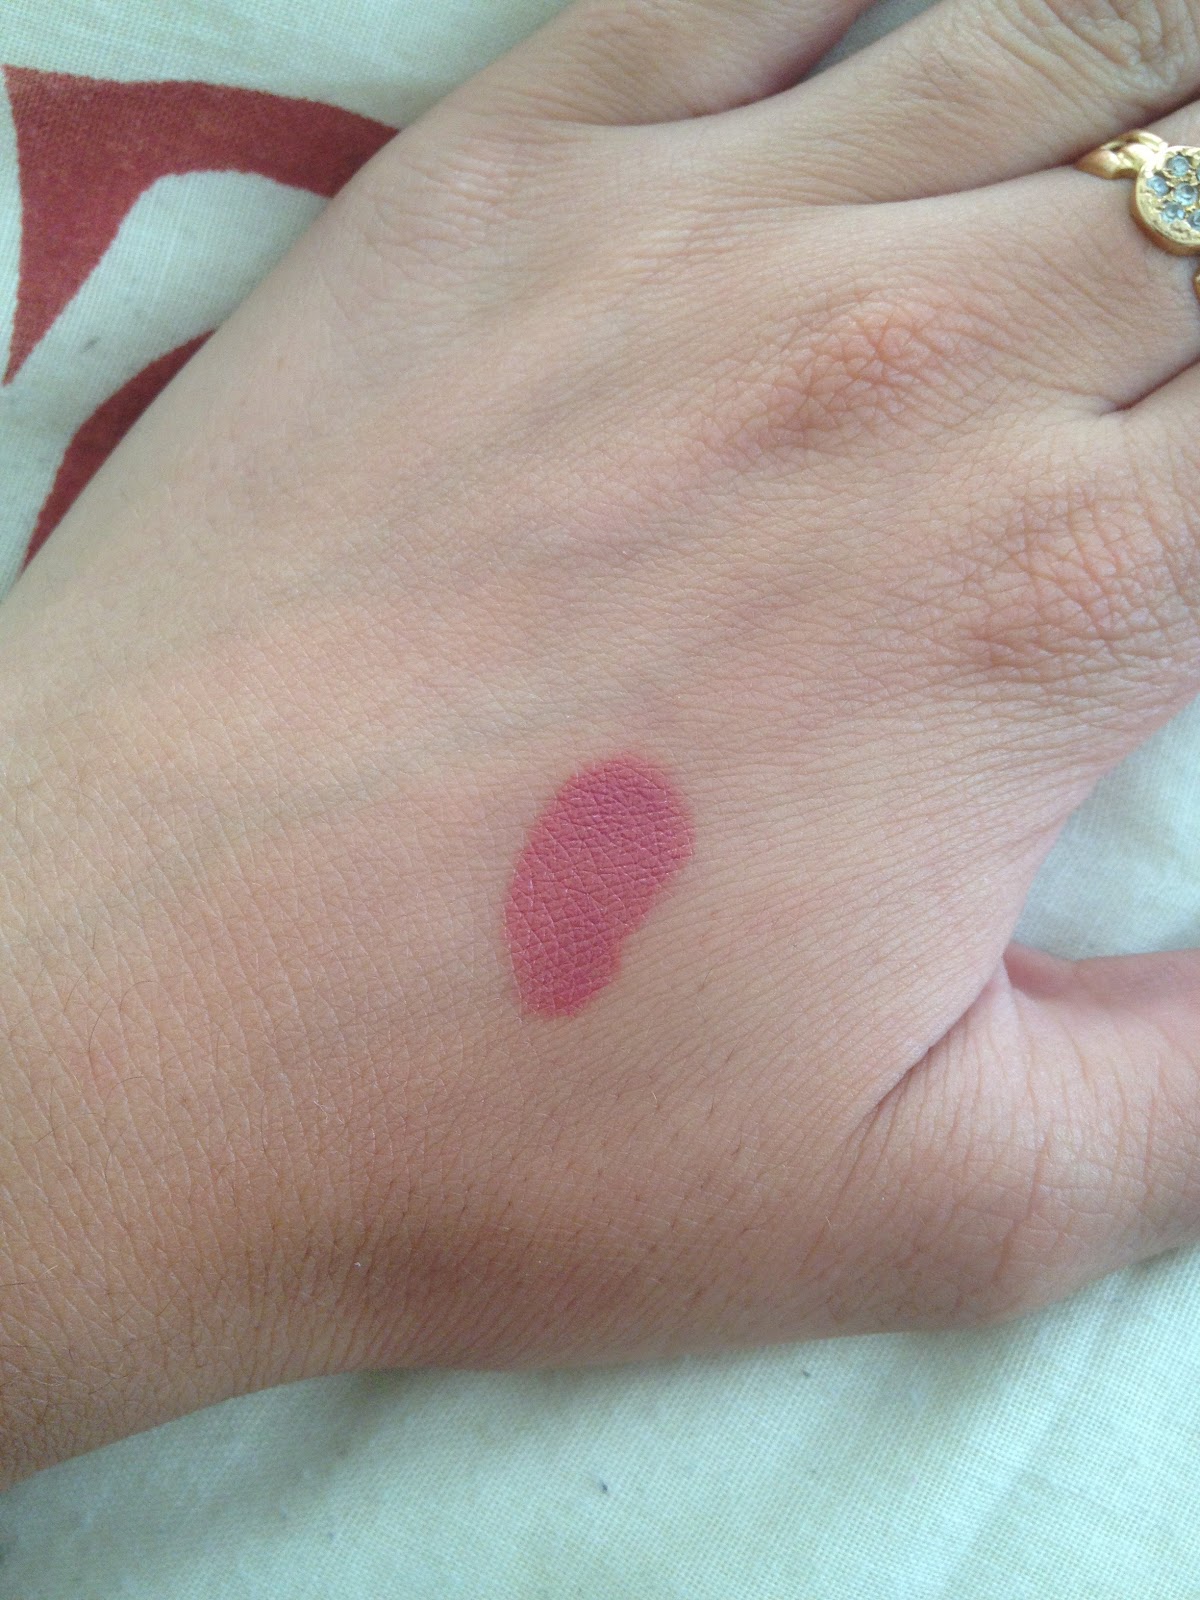 YSL Bois de Rose (66) Rouge Pur Couture SPF15 Lipstick Review & Swatches